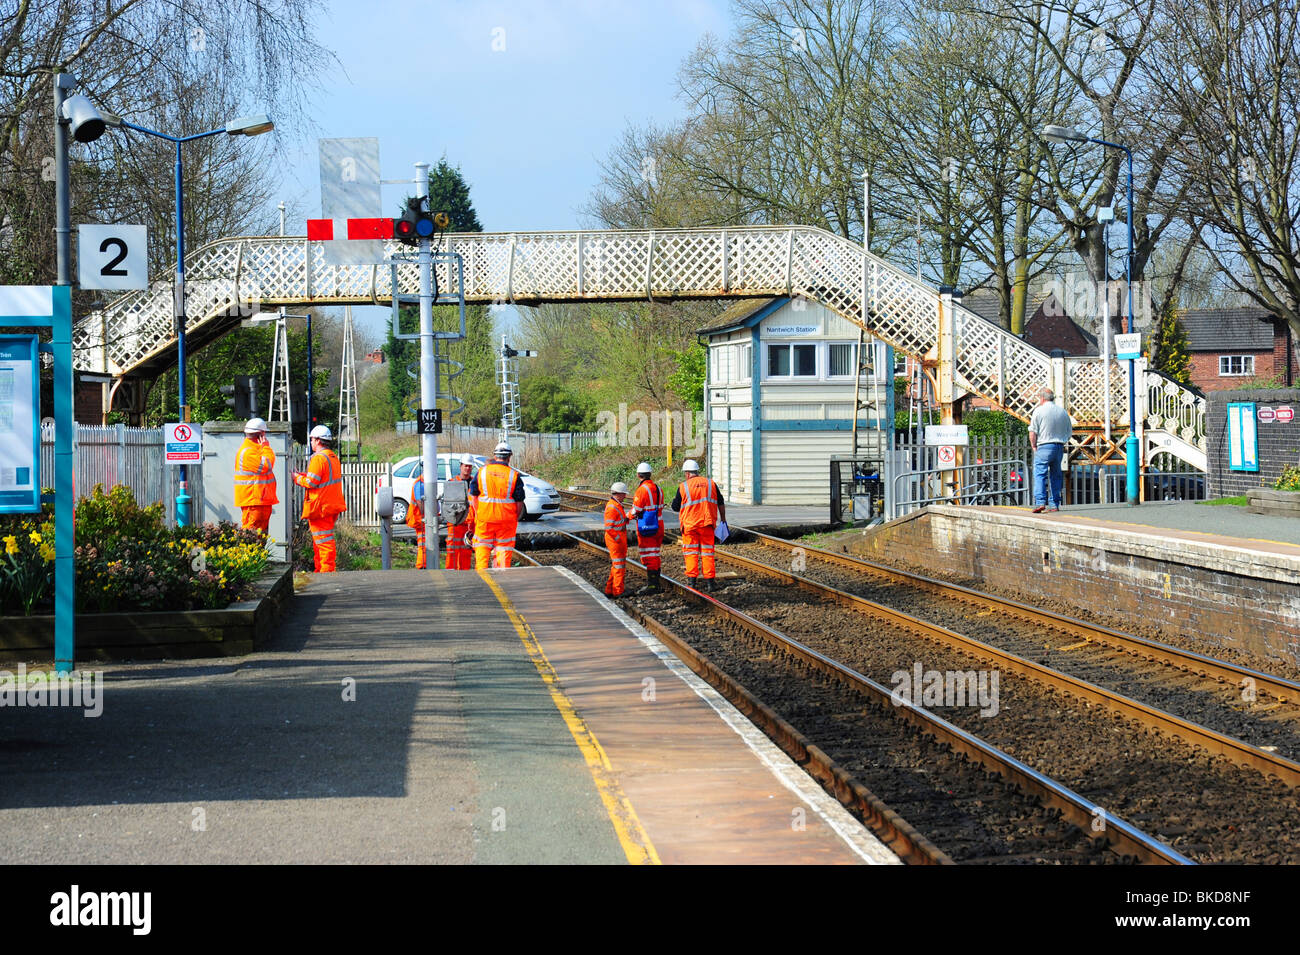 Network rail staff working on the track Stock Photo